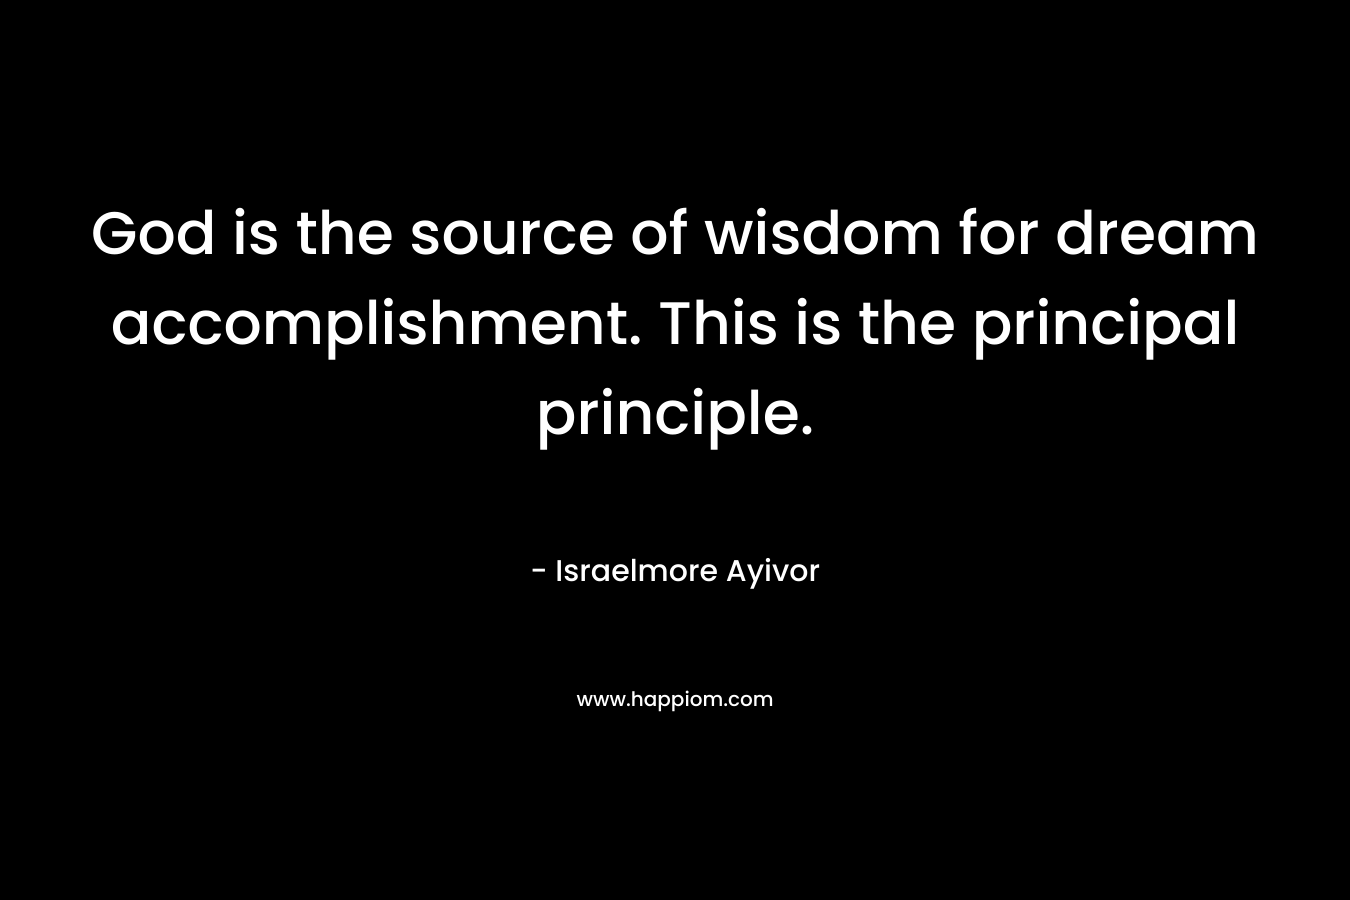 God is the source of wisdom for dream accomplishment. This is the principal principle.